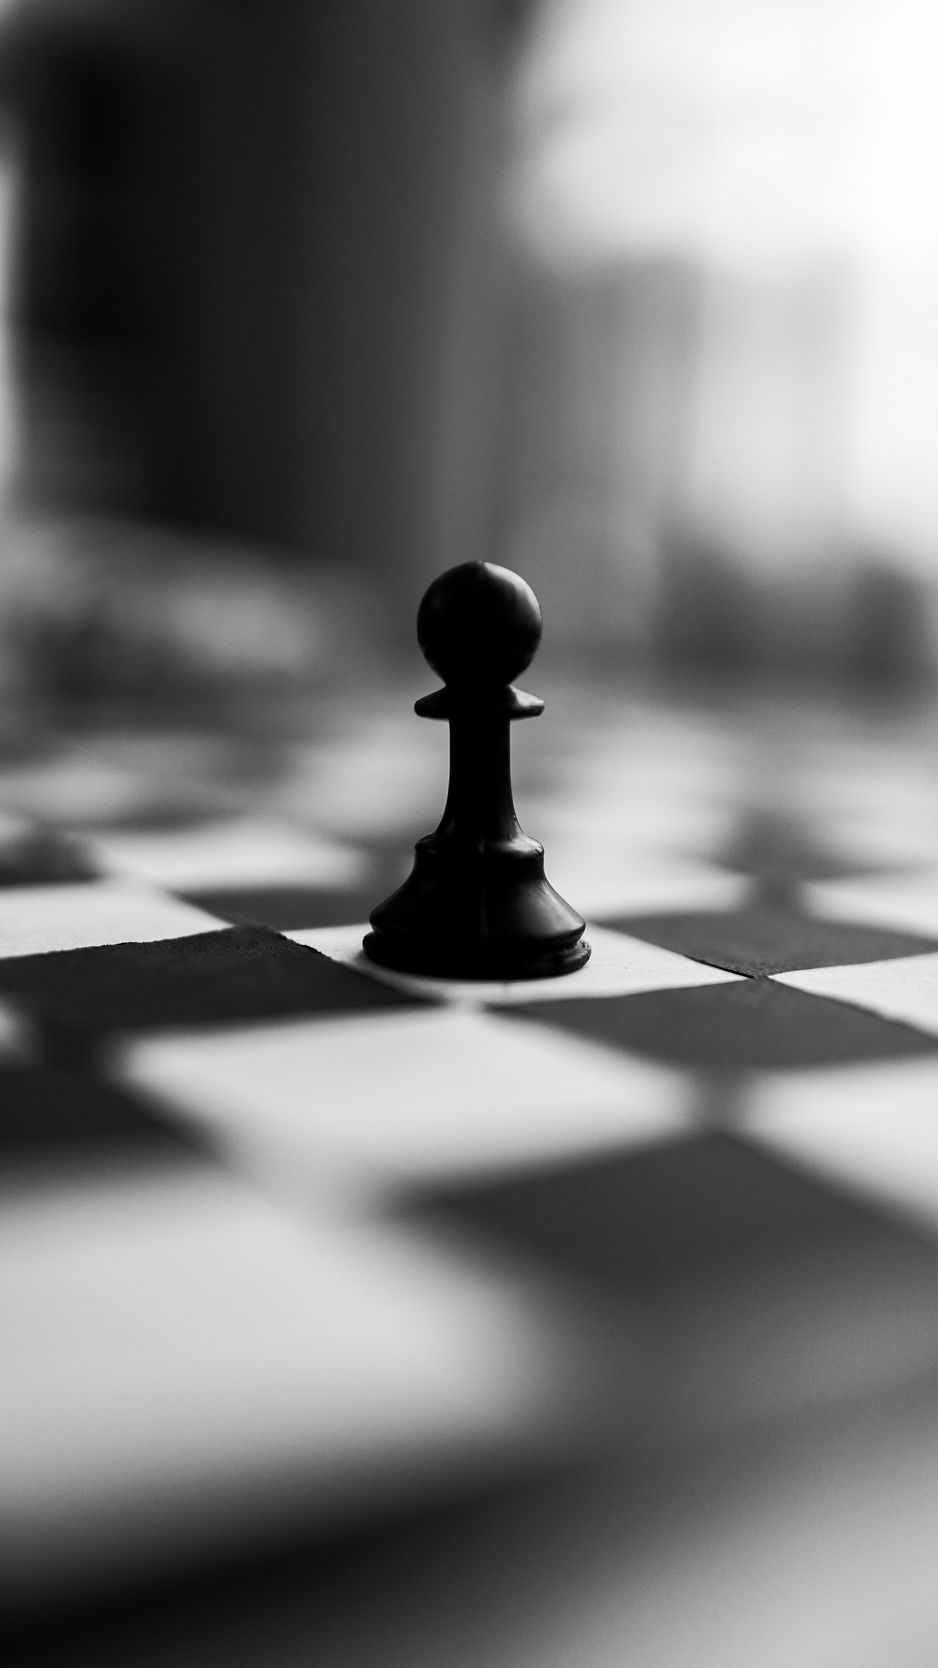 Chess Game IPhone Wallpaper HD - IPhone Wallpapers : iPhone Wallpapers